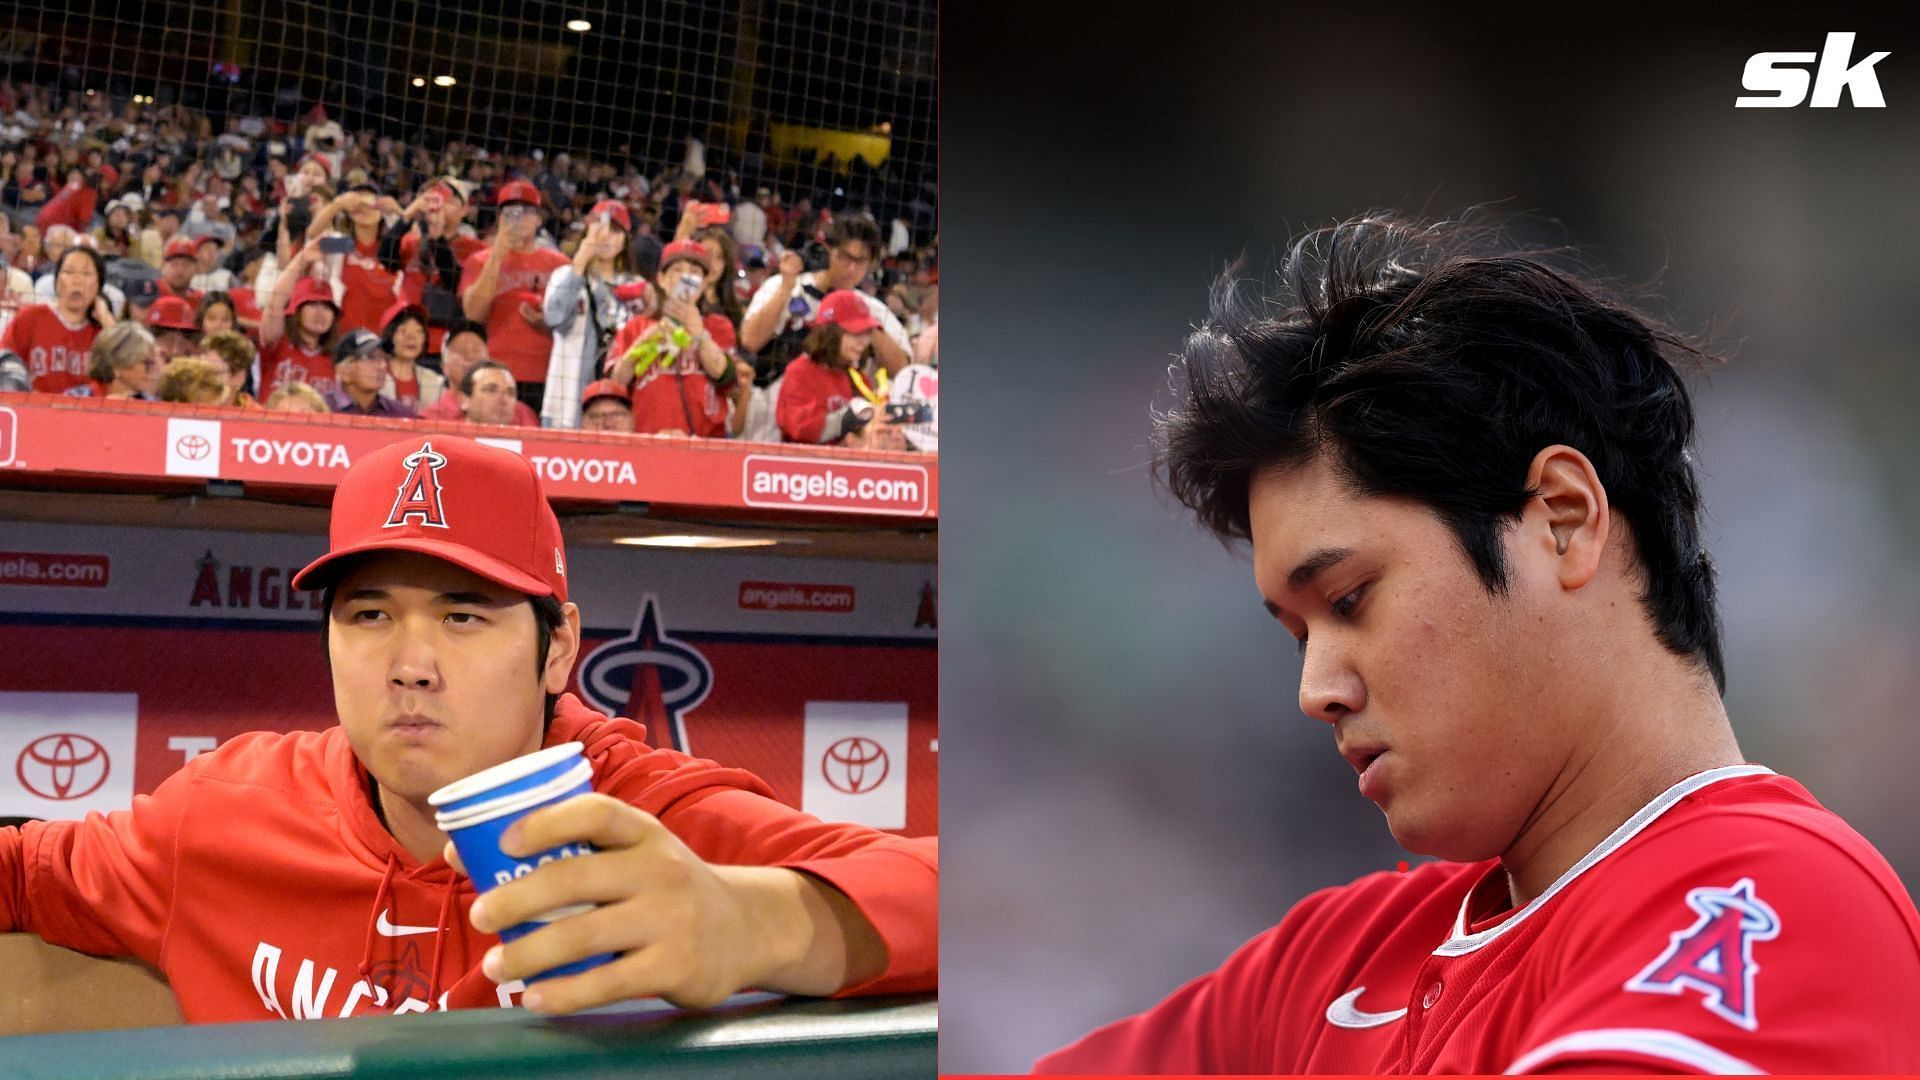 A private event hosted by Shohei Ohtani became the subject of media attention